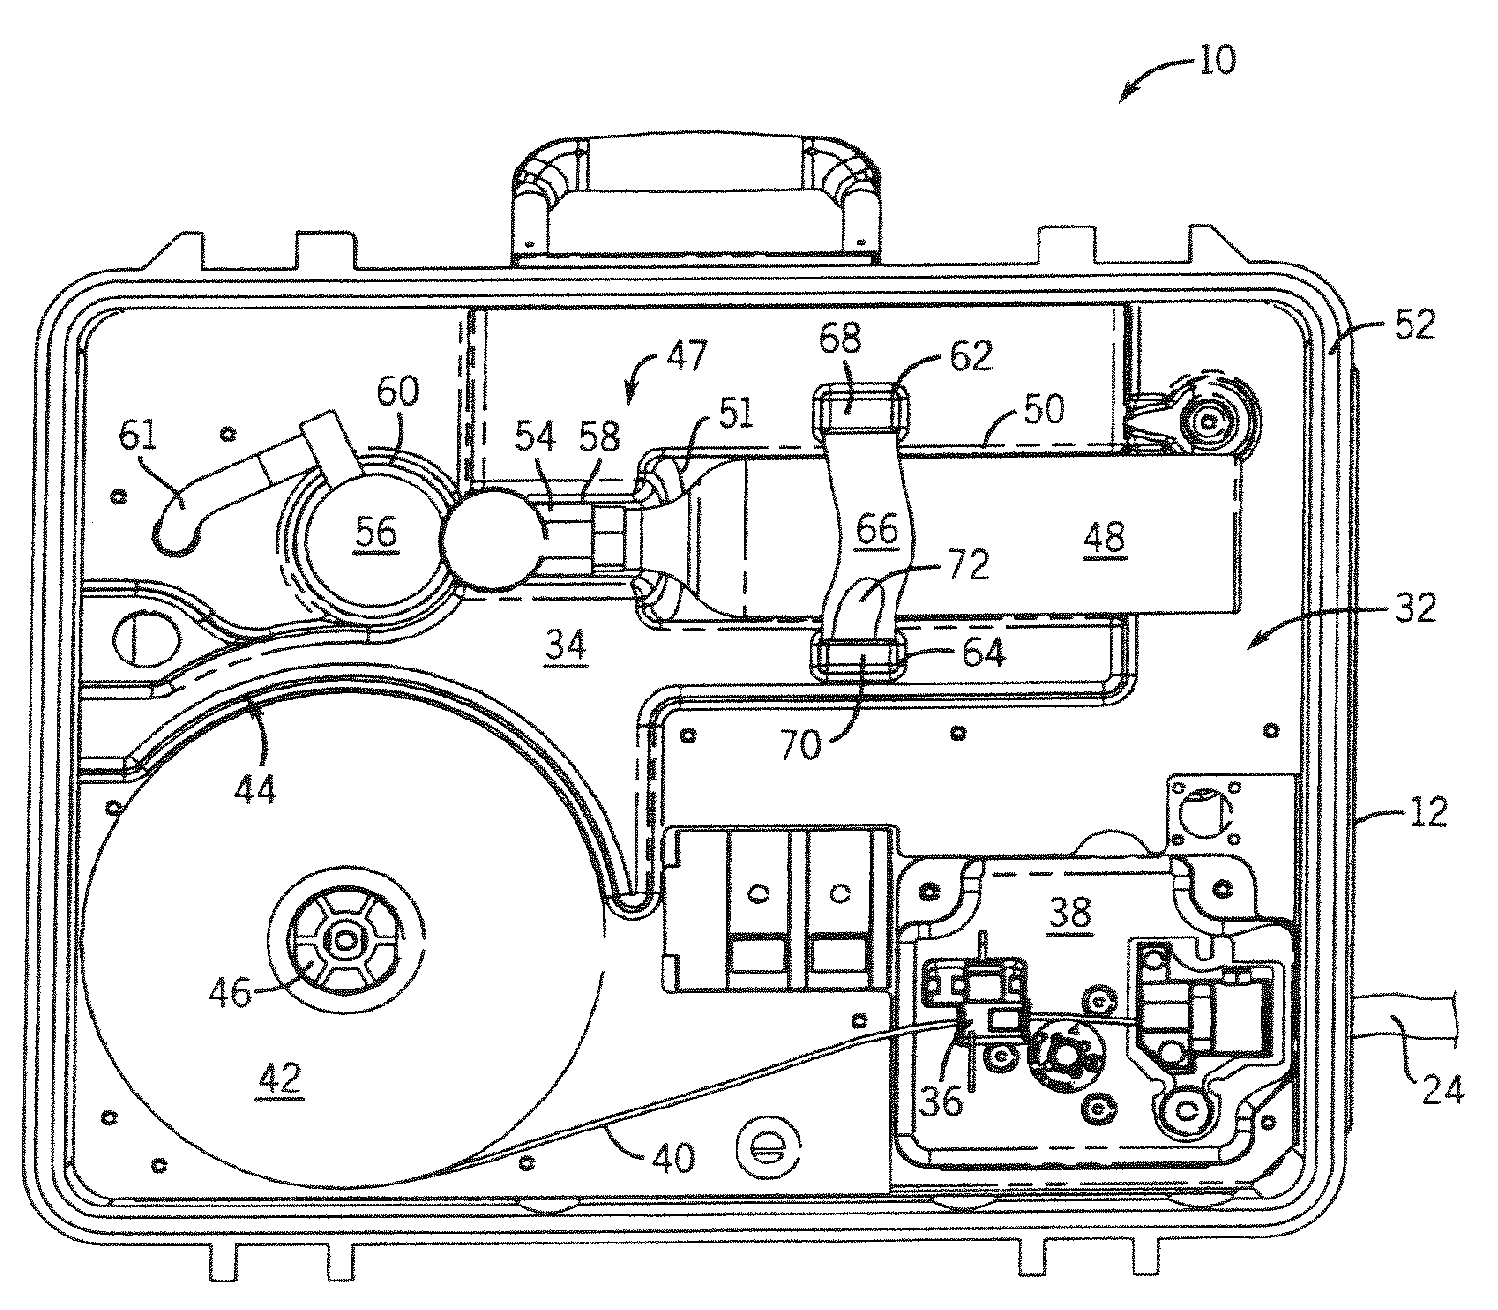 Gas system for wire feeding devices